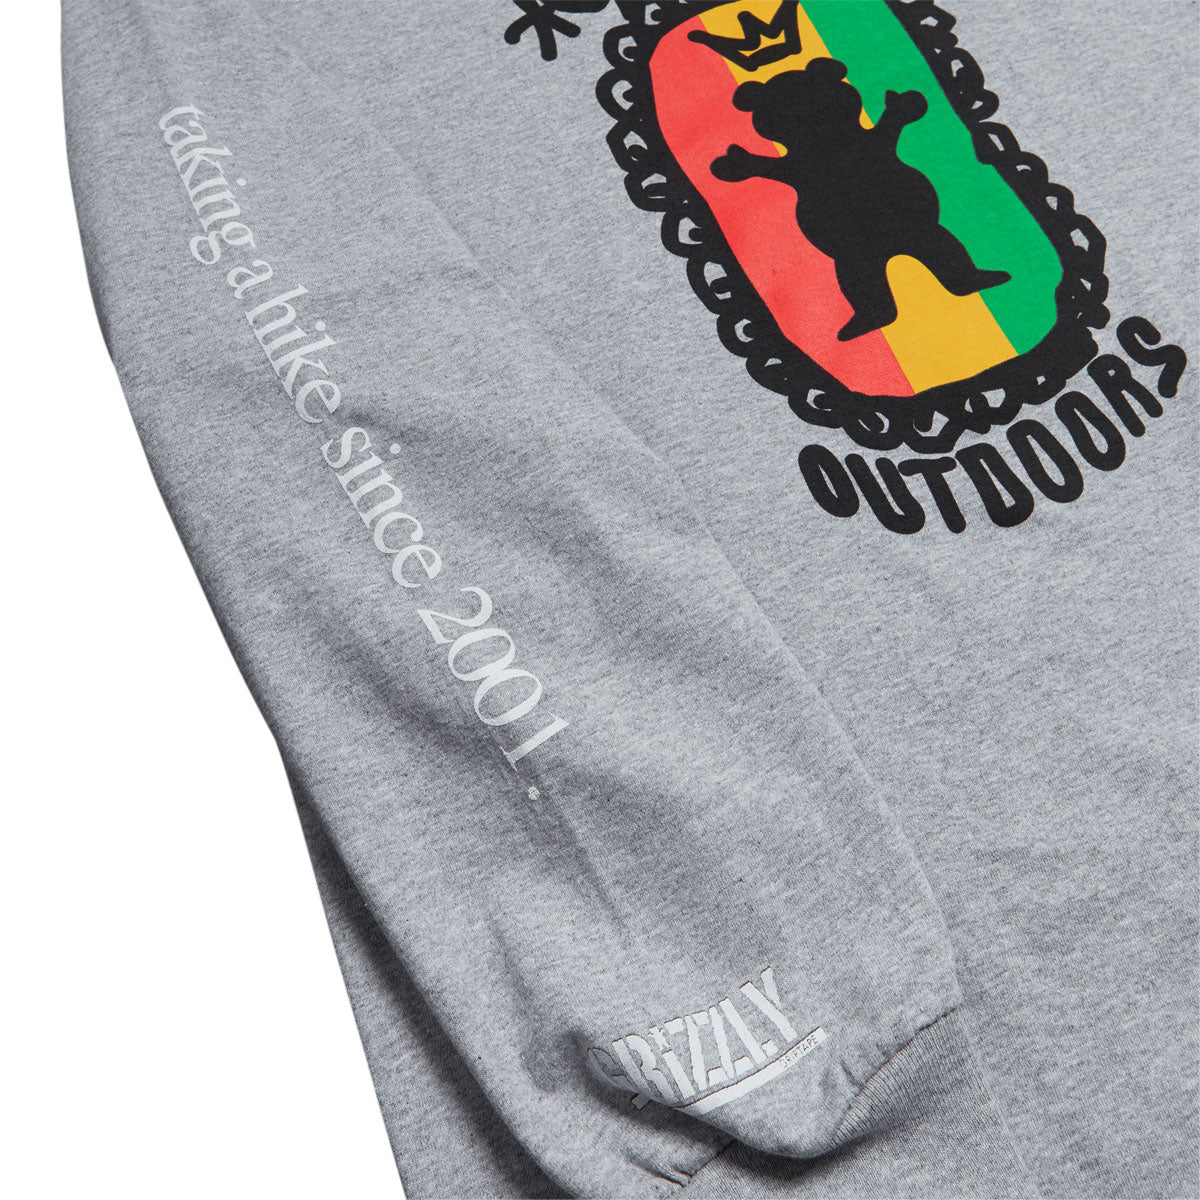 Grizzly Most High Long Sleeve T-Shirt - Heather Grey image 2